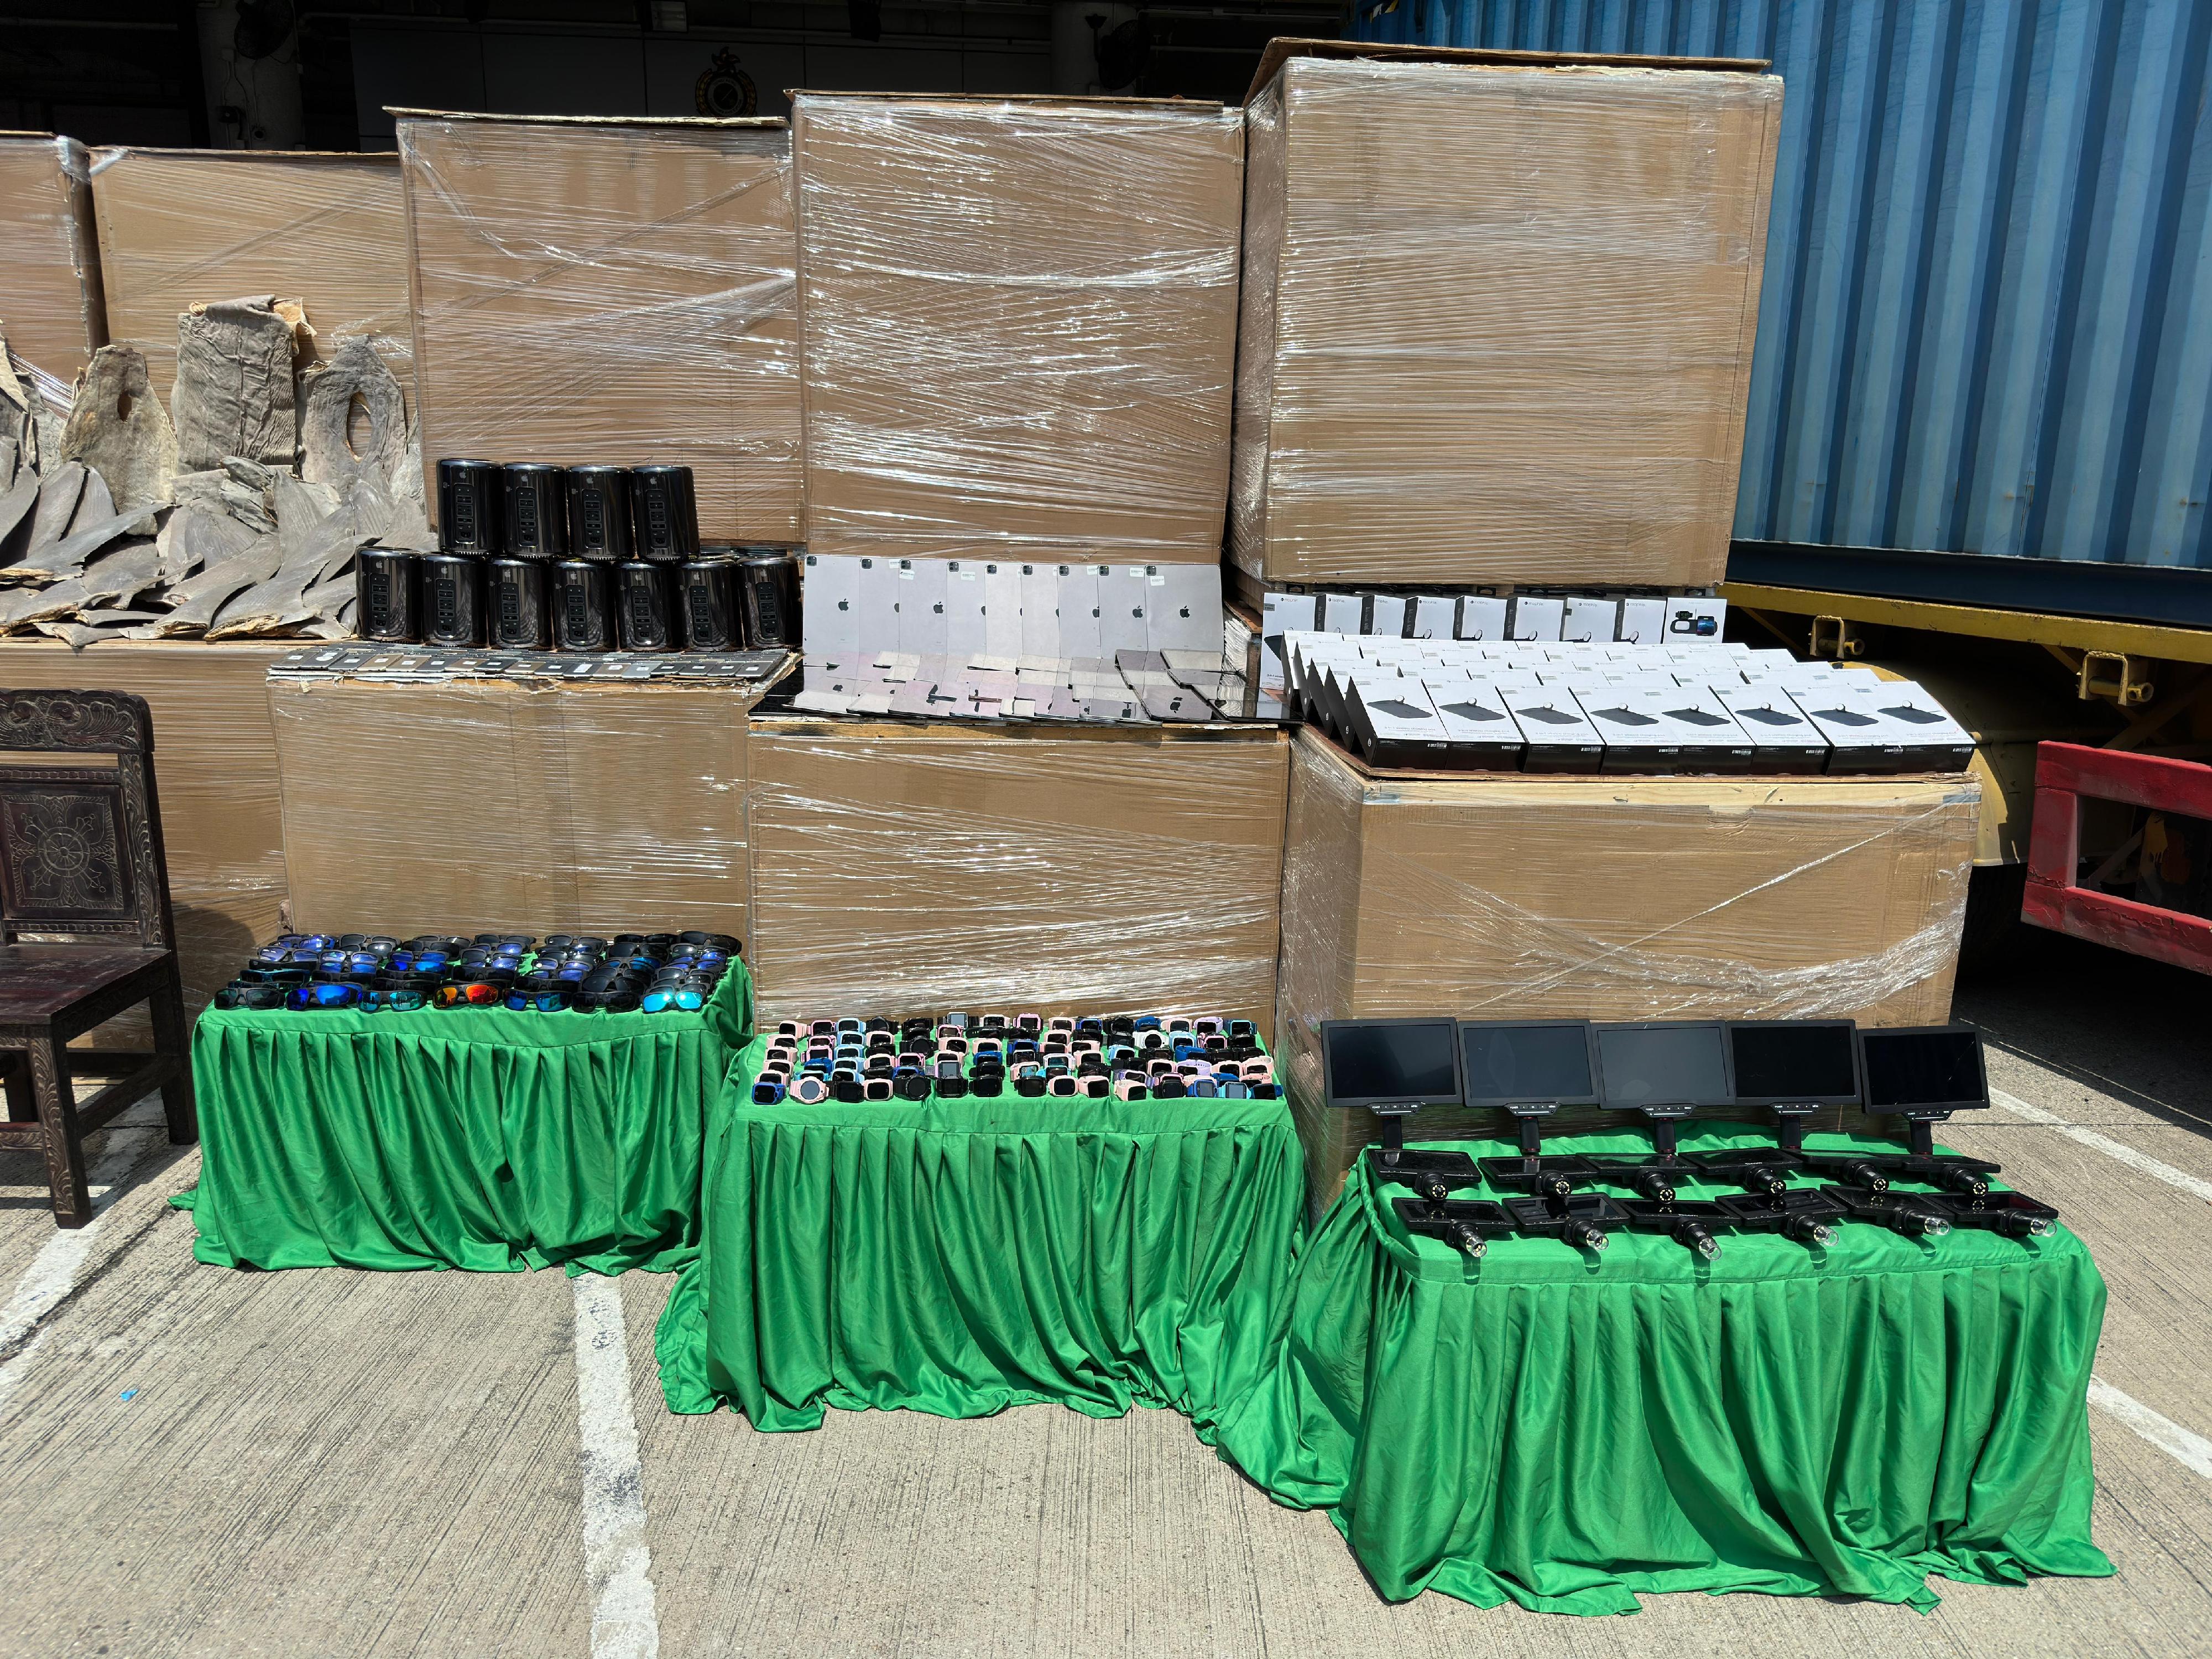 Hong Kong Customs on May 7 detected a suspected case of using an ocean-going vessel to smuggle goods to Taiwan at the Kwai Chung Container Terminals. A large batch of unmanifested goods, including suspected scheduled dried shark fins and skins, suspected scheduled wood furniture, electronic components and electronic products, with an estimated market value of about $160 million was seized inside two containers. Photo shows some of the suspected smuggled electronic components and electronic products seized.